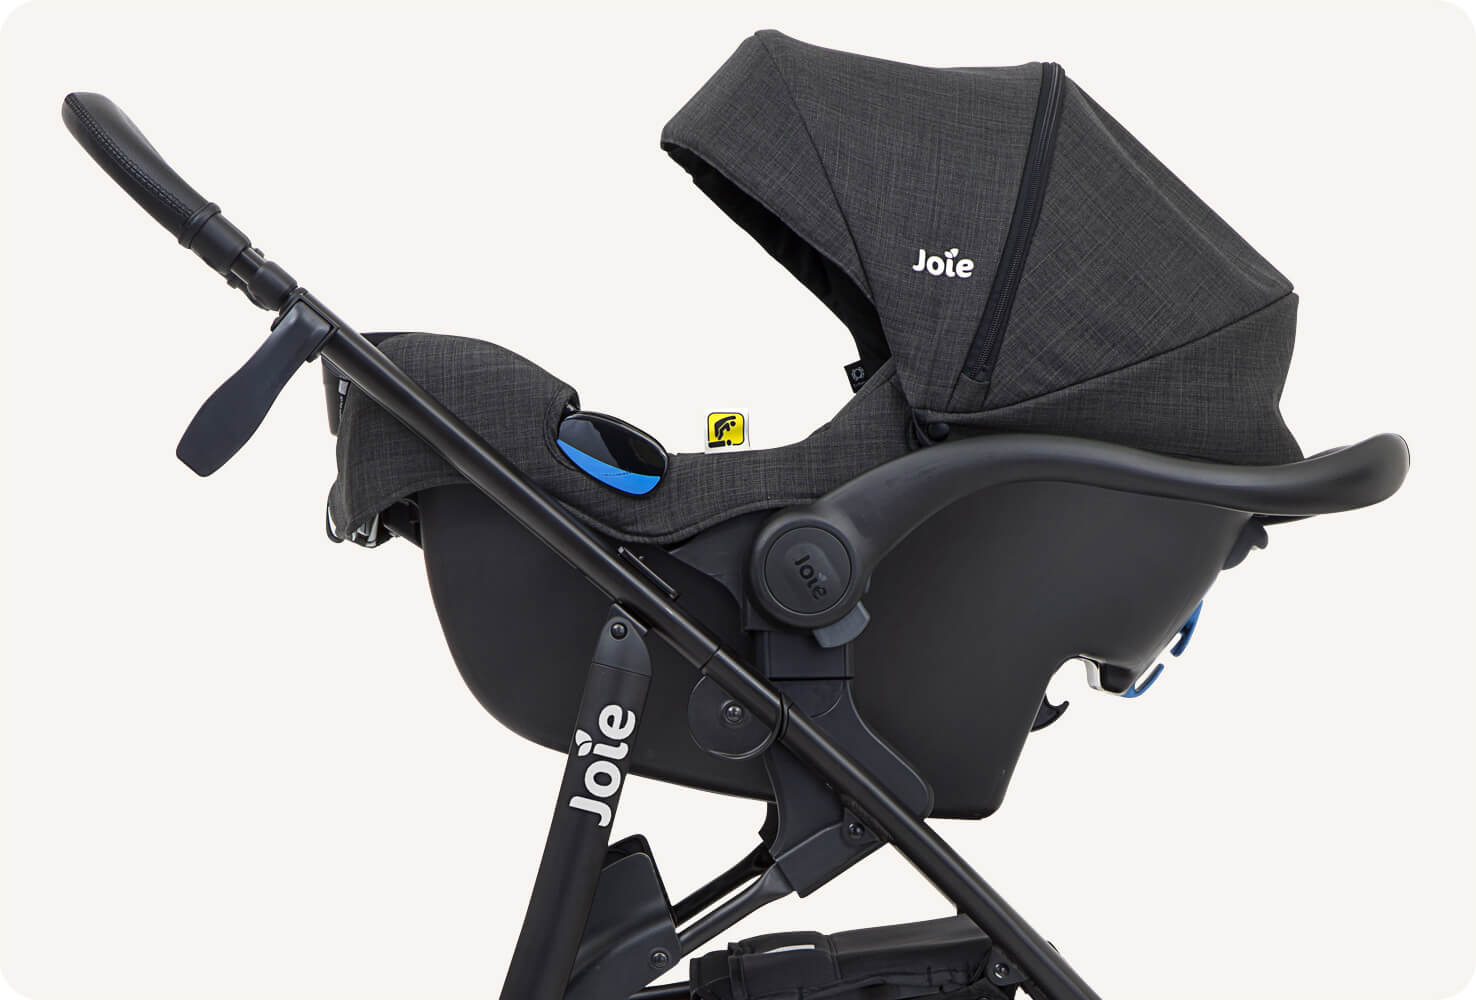   Joie mytrax stroller in black with infant carrier attached, zoomed in to show where it attaches to the stroller base. 